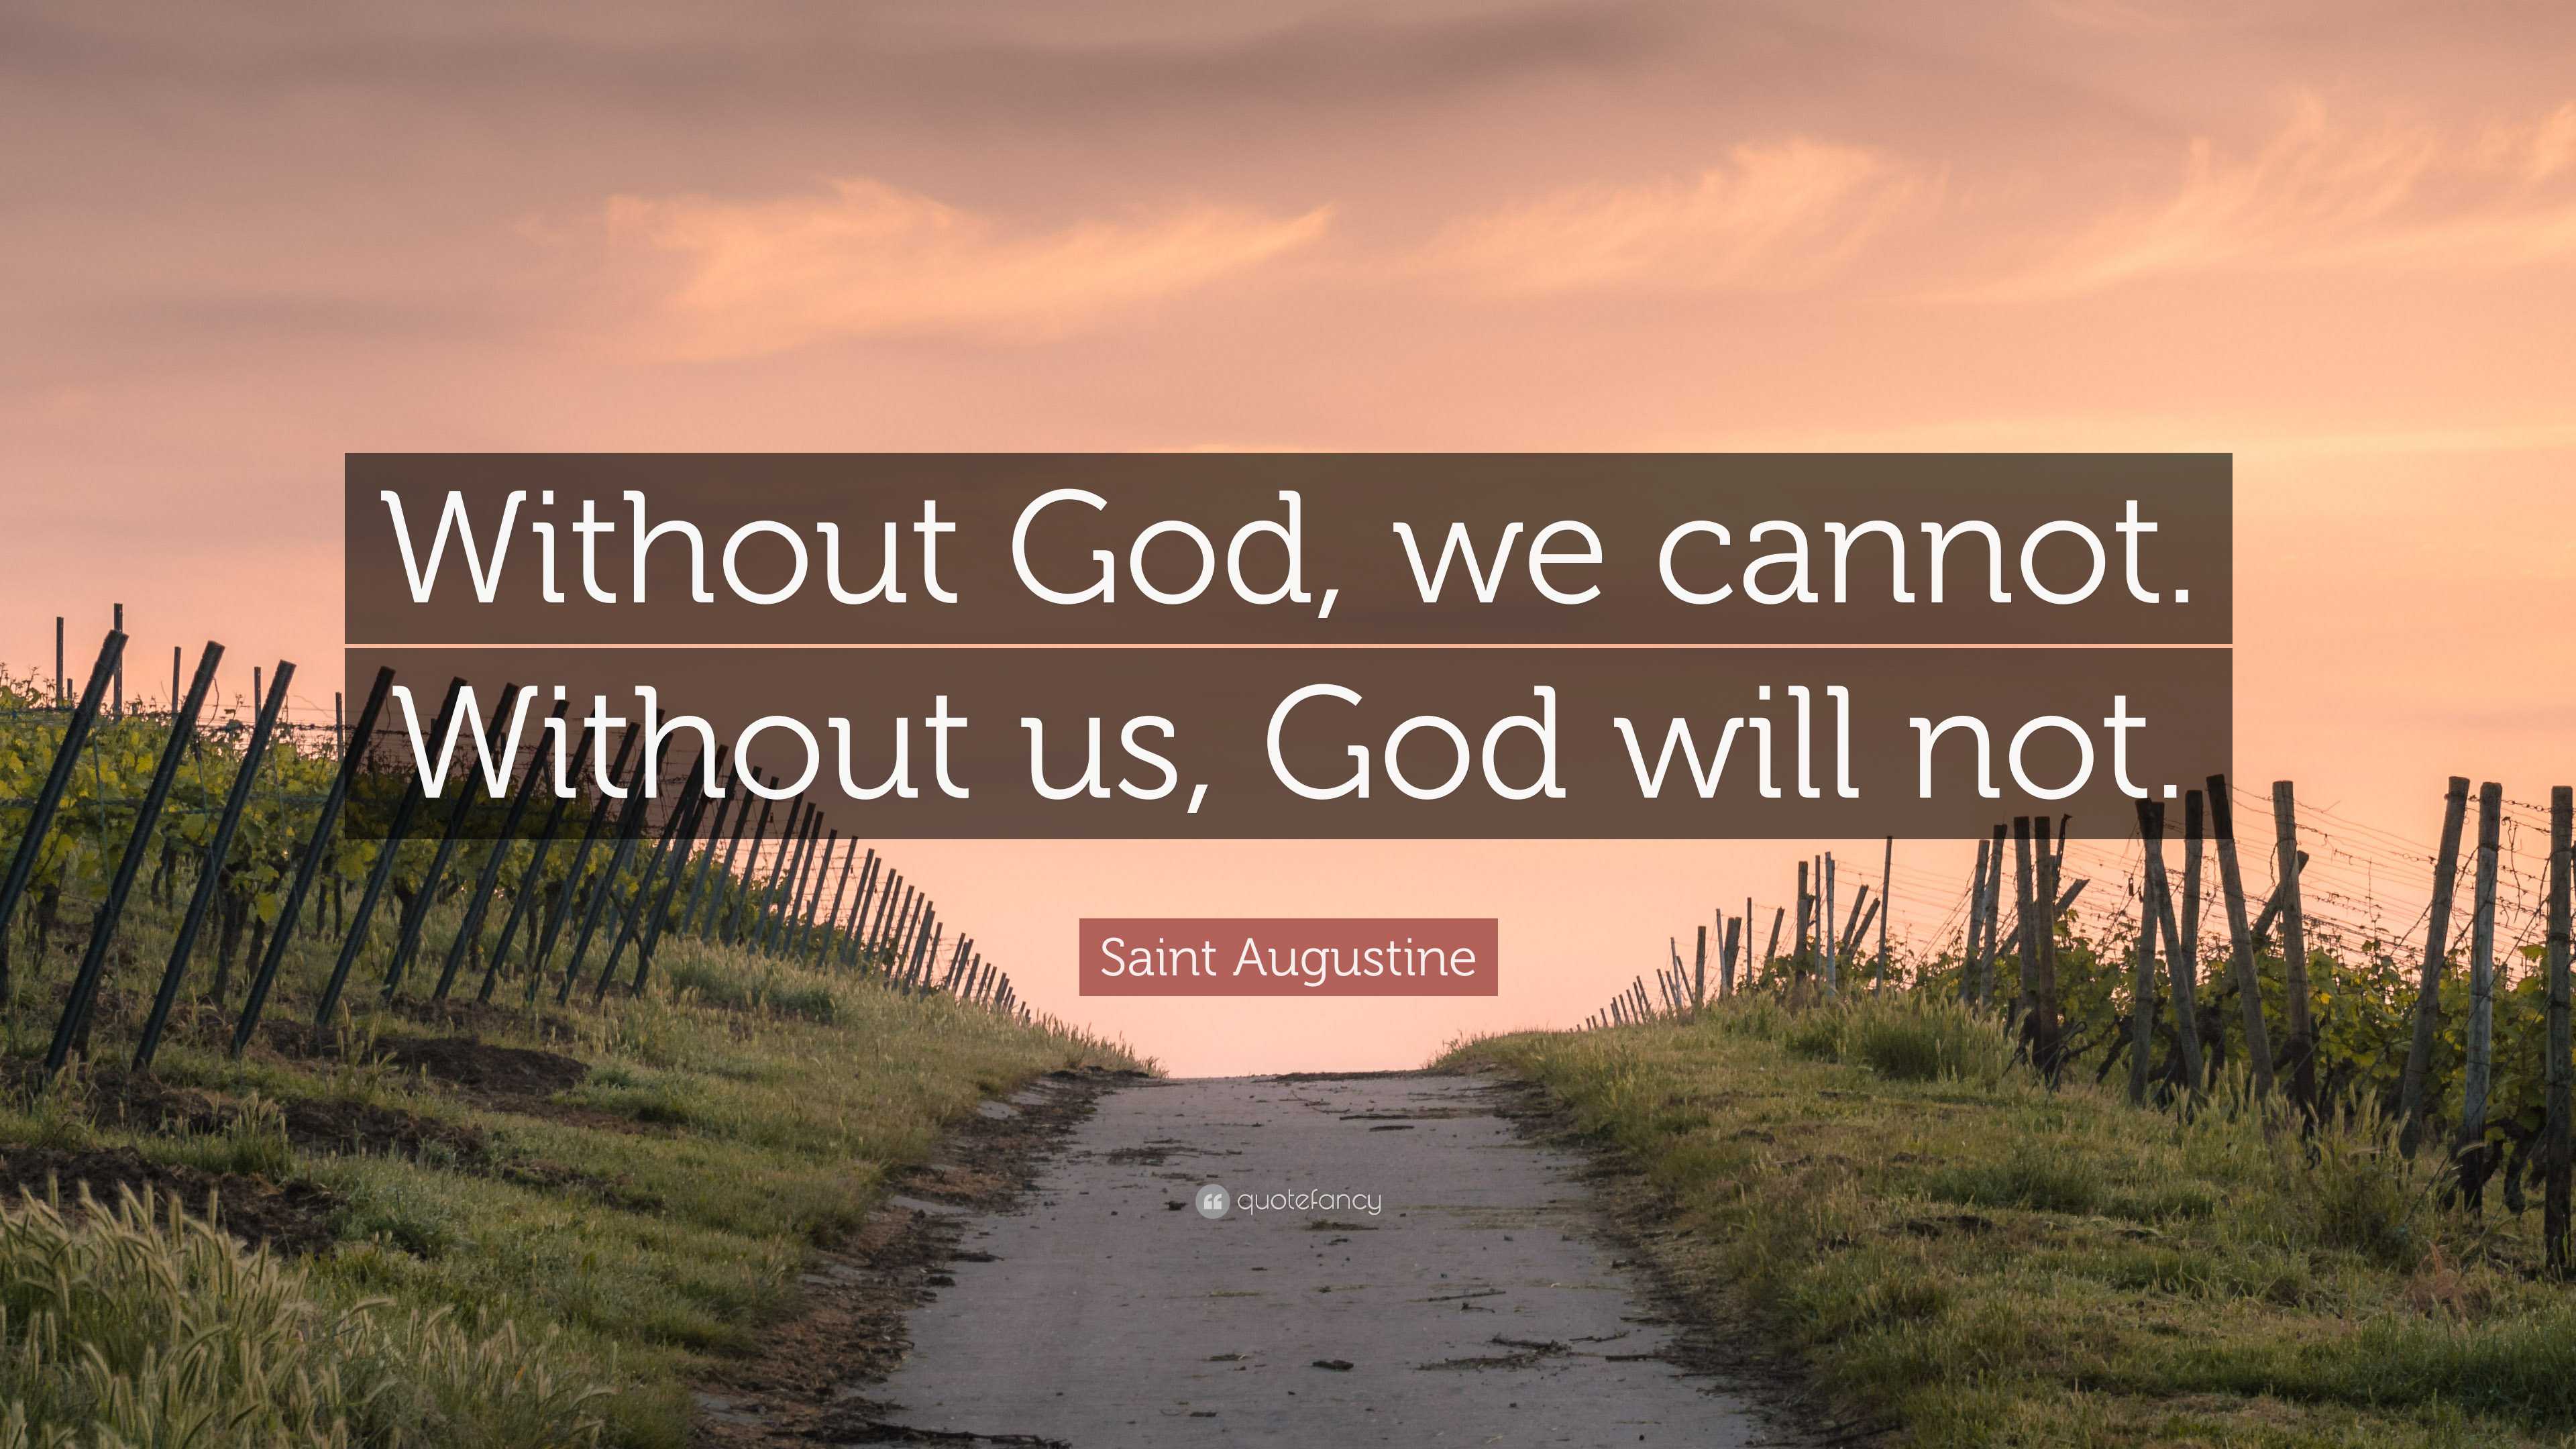 Saint Augustine Quote: “Without God, we cannot. Without us, God will not.”